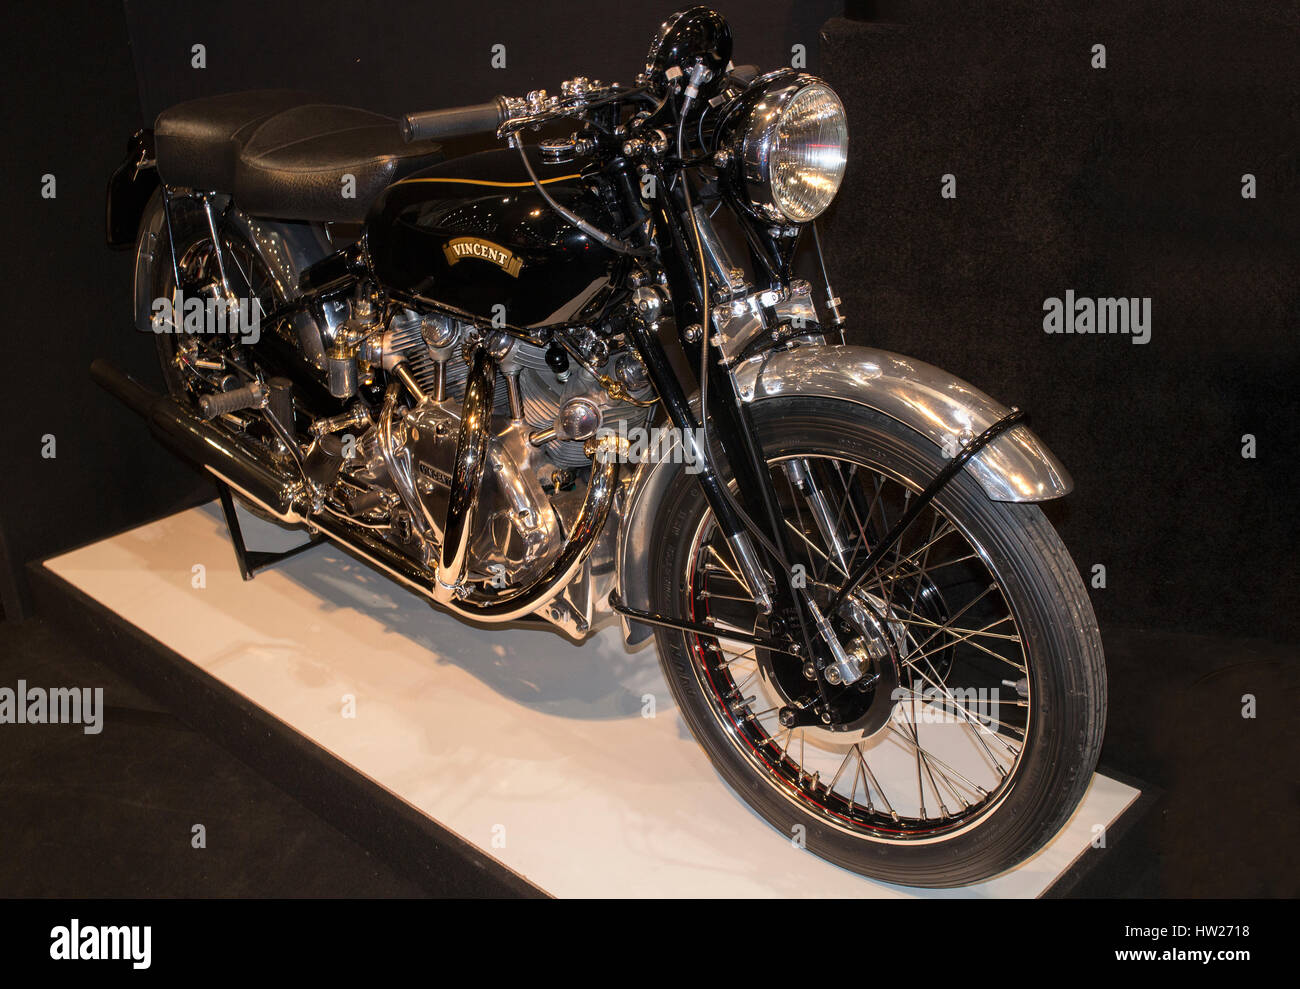 A classic Vincent Series C 'Black Shadow' motorbike at the London Classic  Car Show 2017 Stock Photo - Alamy